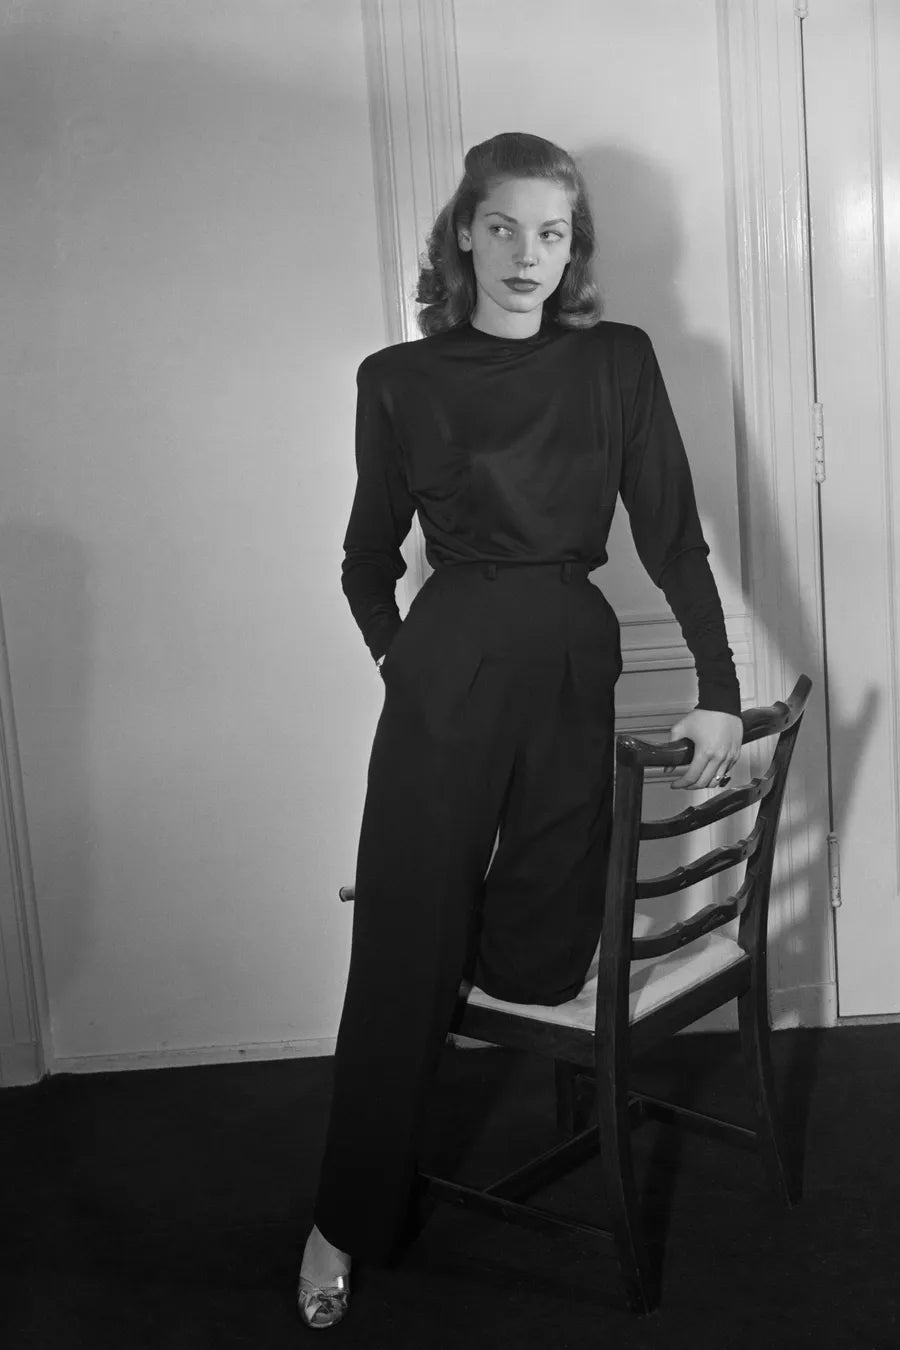 Black and white image of a model wearing a tailored black suit as she leans on a chair.